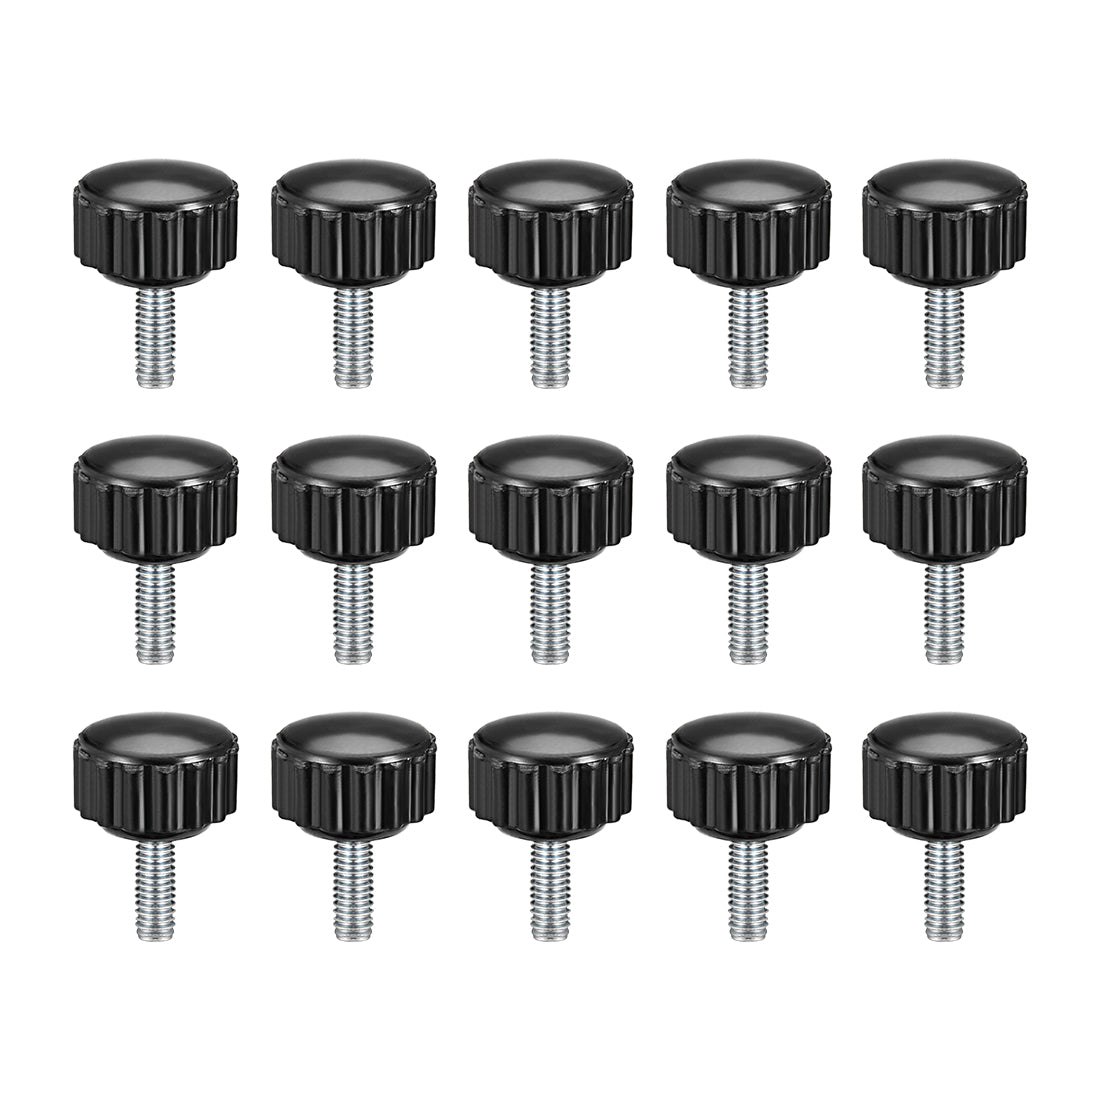 Uxcell Uxcell M5 x 15mm Male Thread Knurled Clamping Knobs Grip Thumb Screw on Type 15 Pcs